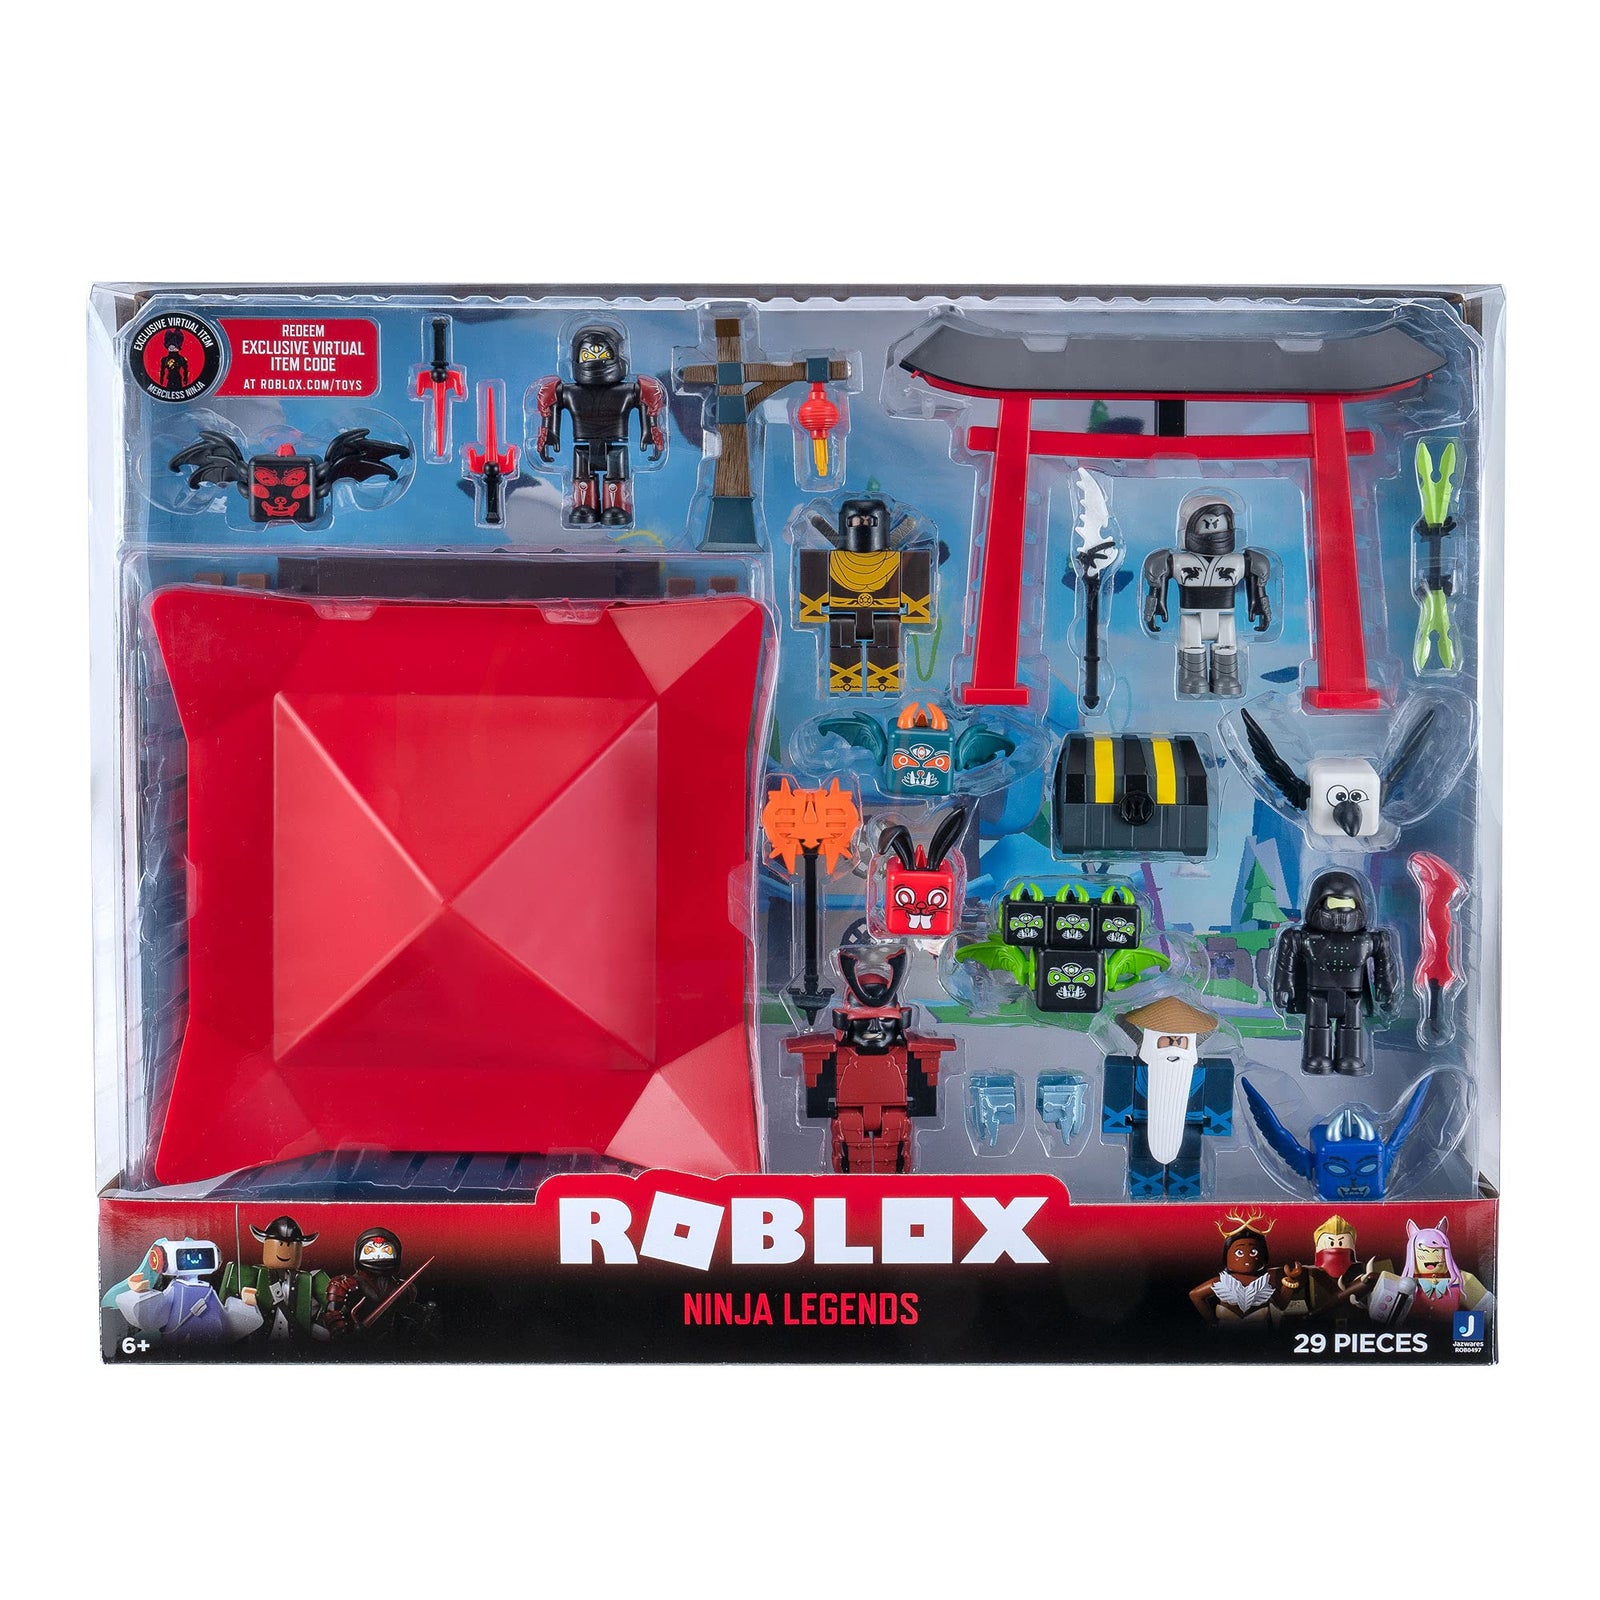 Roblox Action Collection - Ninja Legends Deluxe Playset [Includes Exclusive Virtual Item]